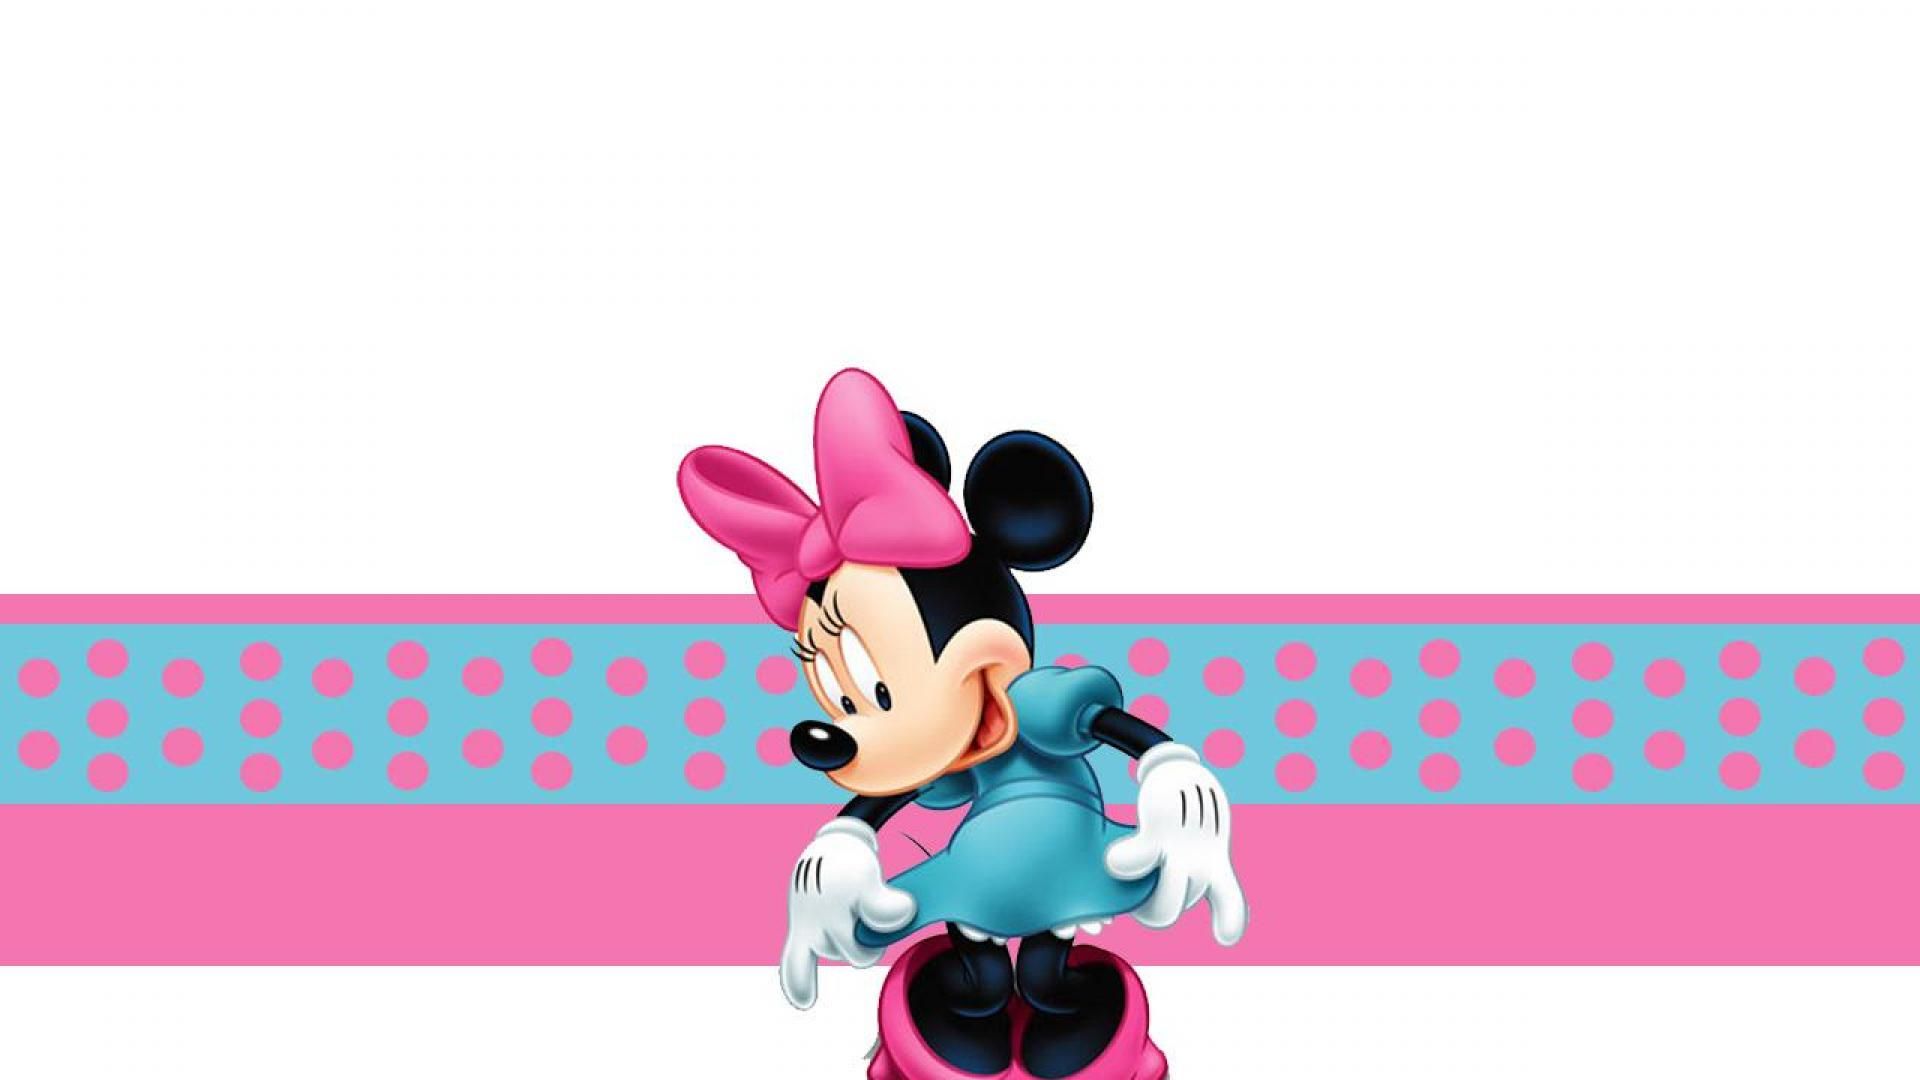 Minnie mouse - (#138642) - High Quality and Resolution Wallpapers ...